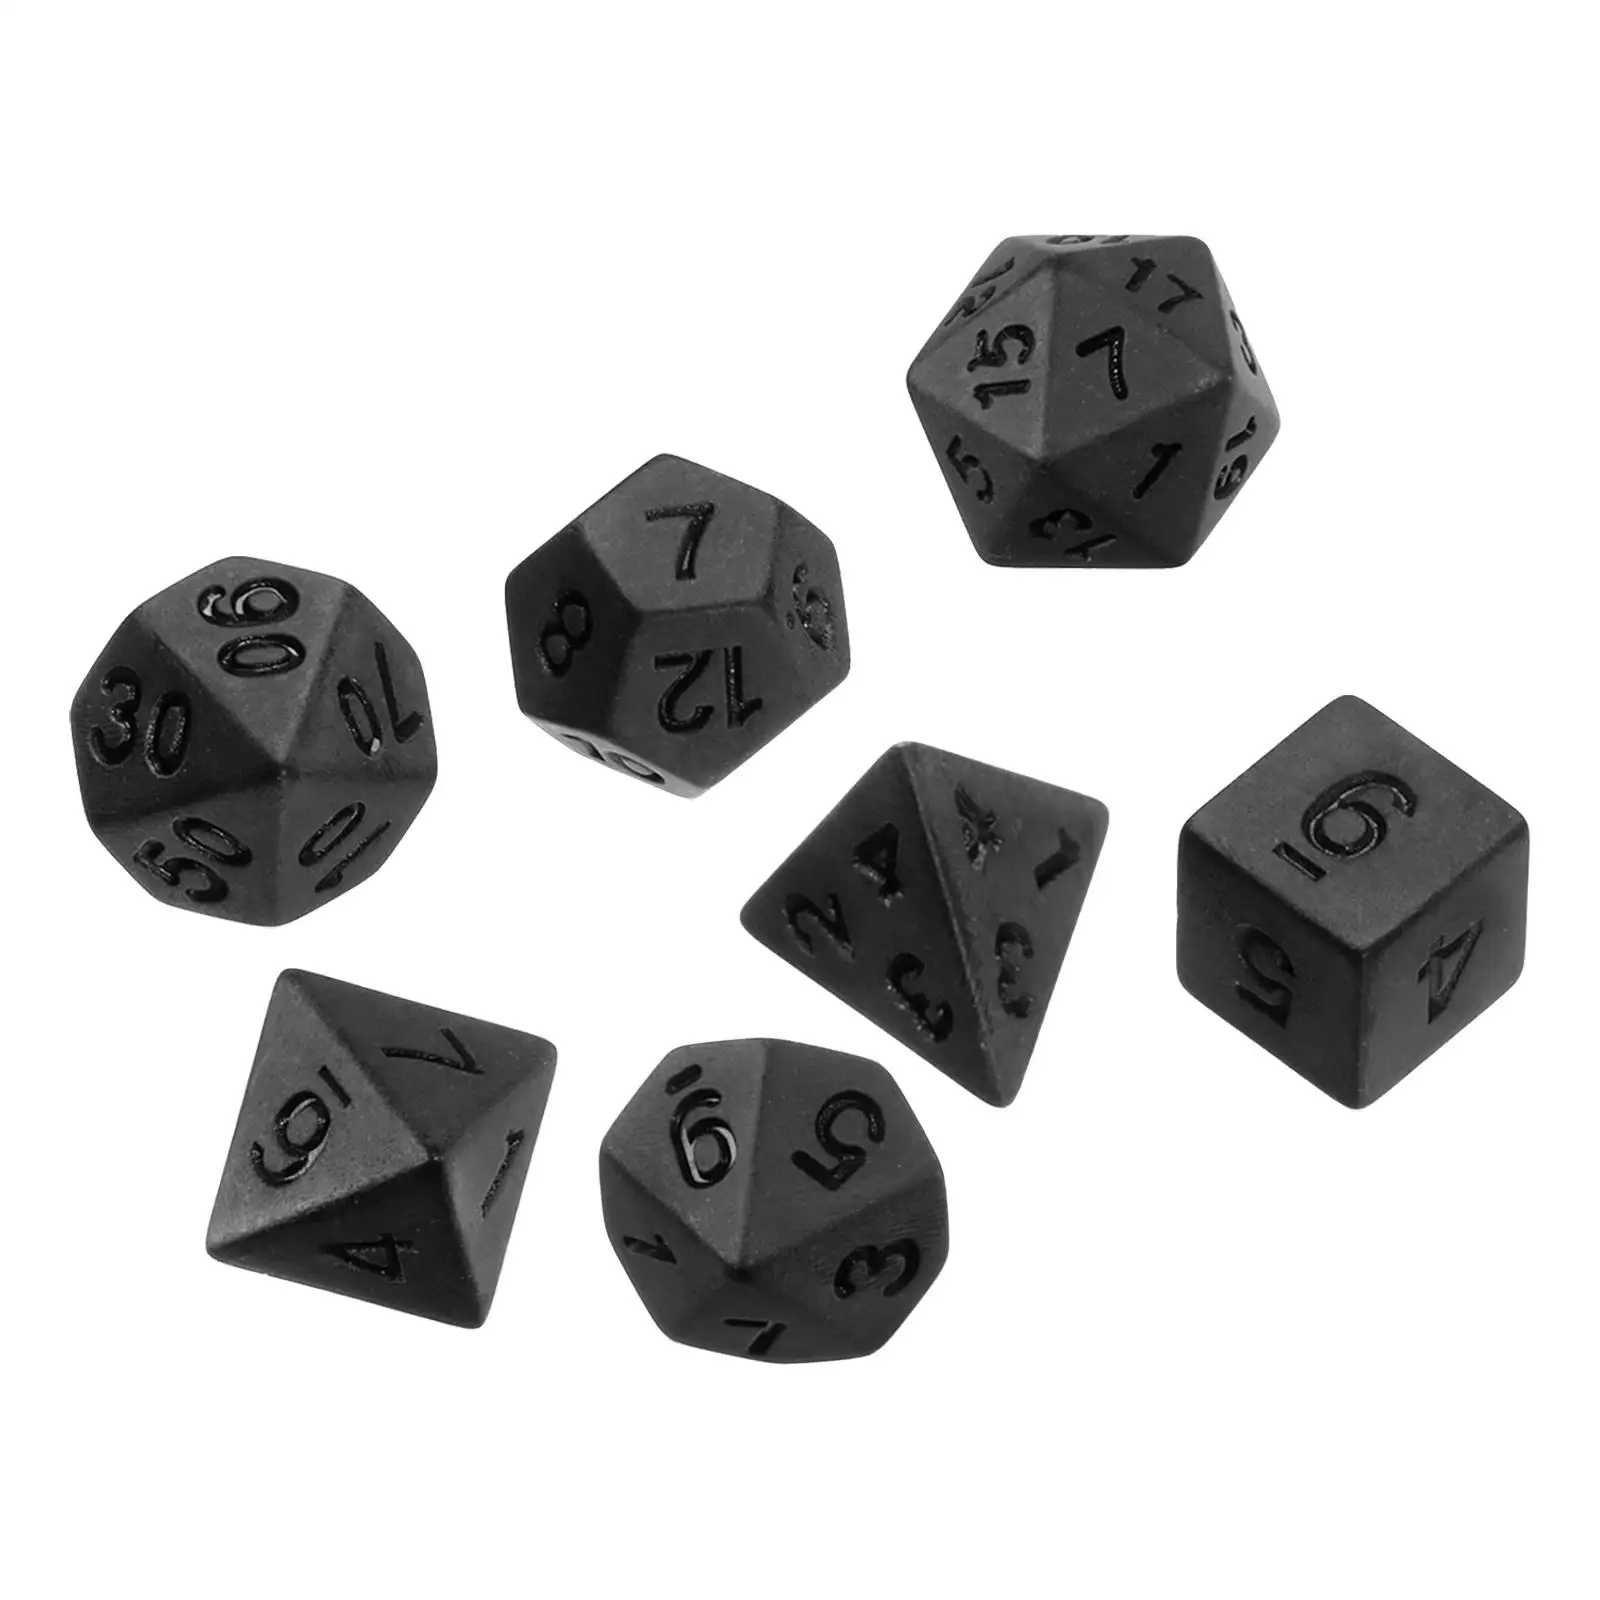 Polyhedral Dice black, 7 Pieces Game Dices D6 D4 D8 D10 D12 D20 for Role Playing Board Game Drinking Entertainment